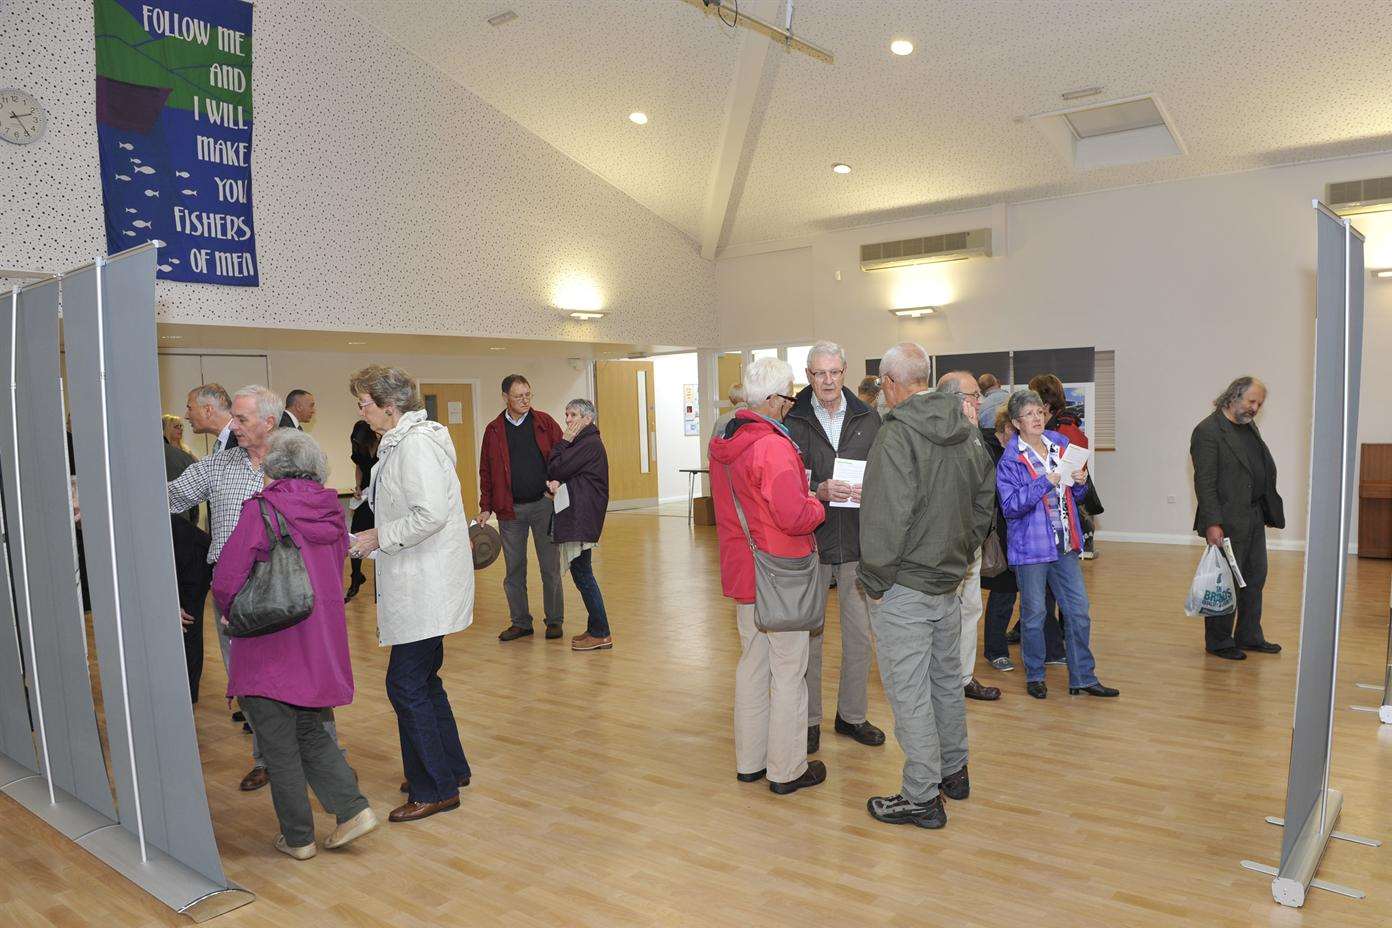 The exhibition attracted nearly 200 residents